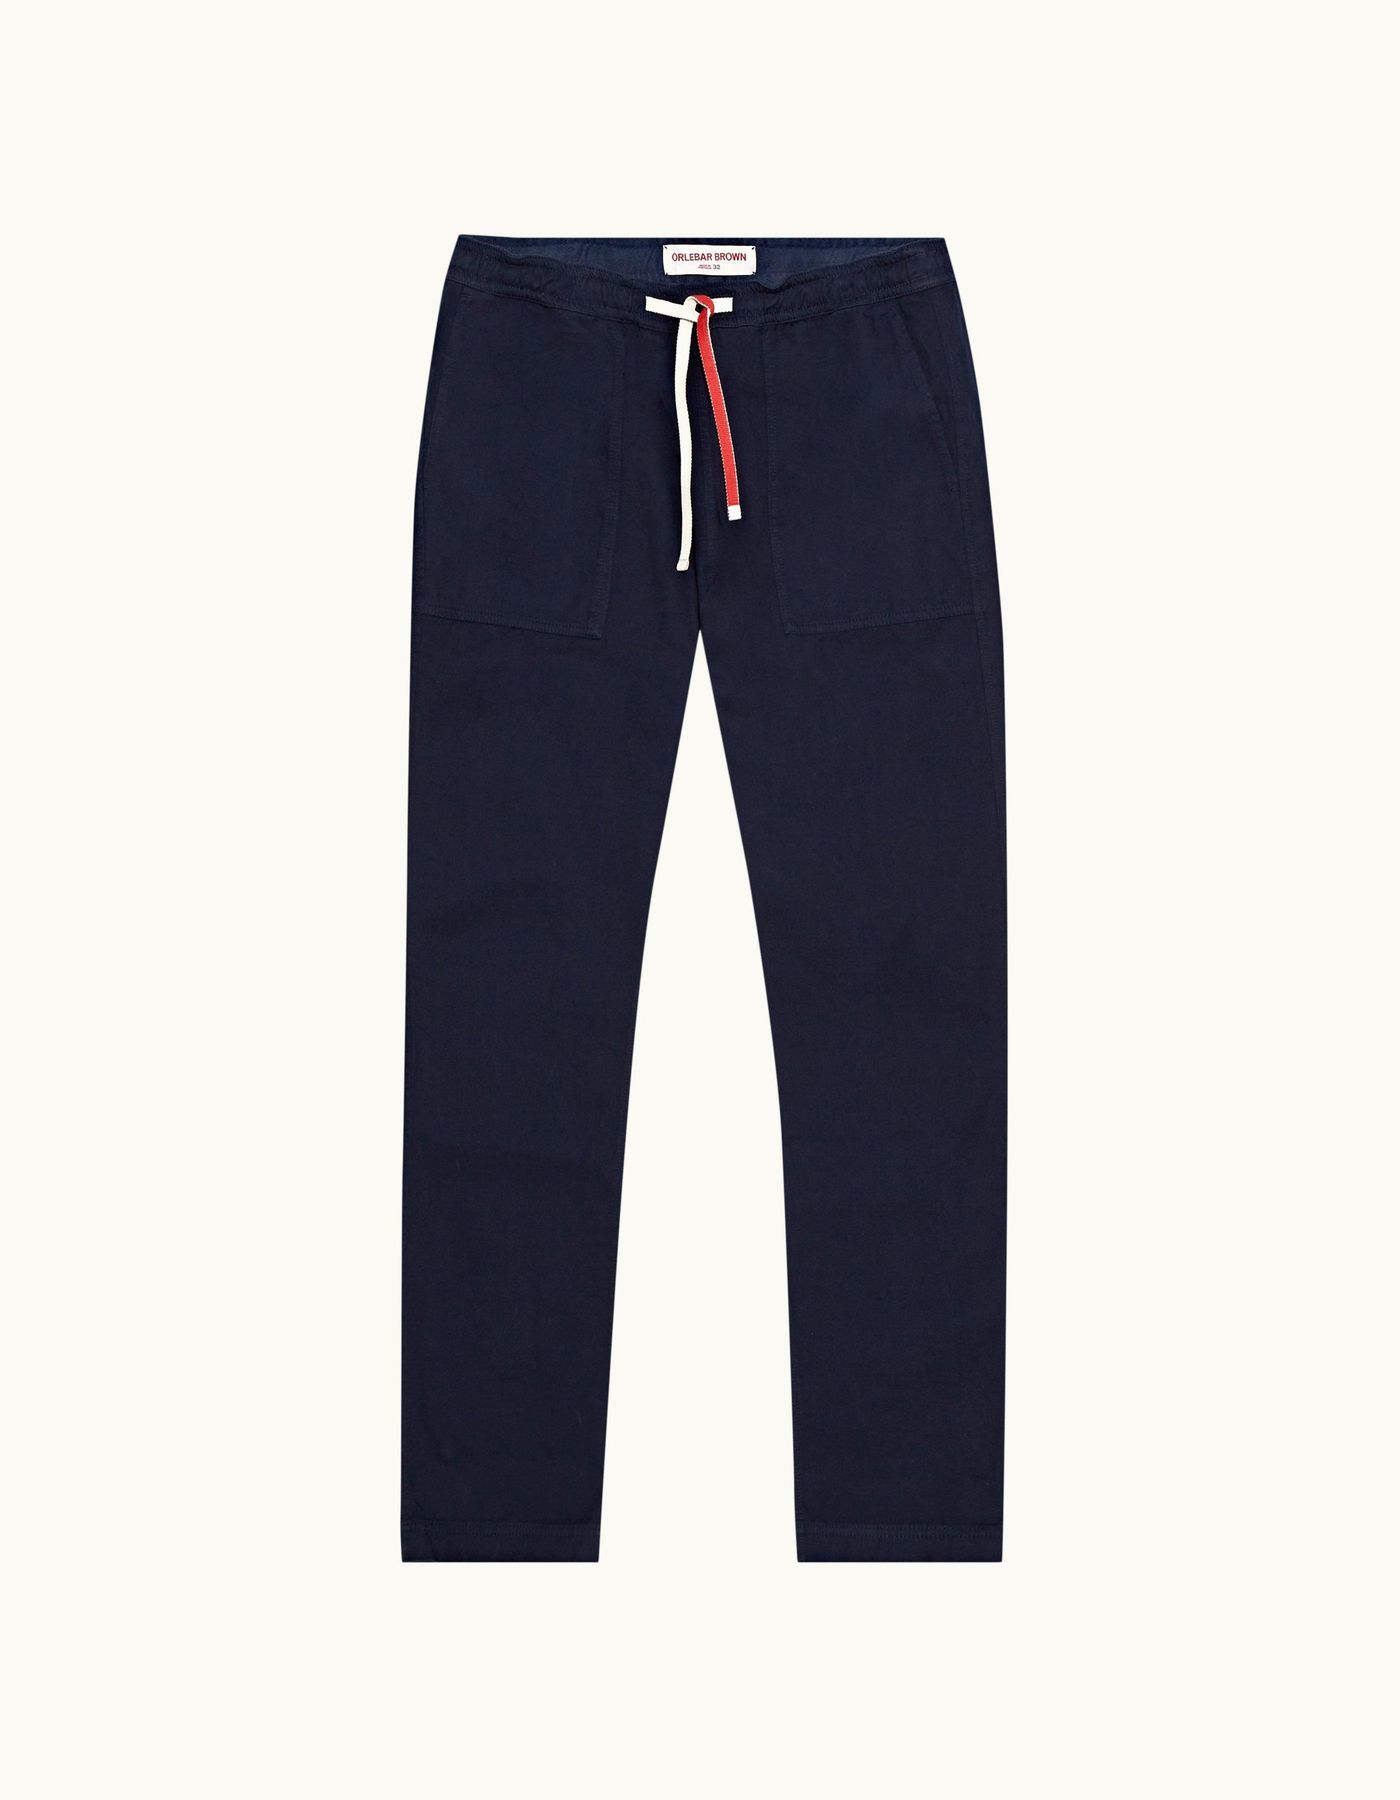 Telford Drawcord - Mens Navy Relaxed Fit Two-Tone Drawcord Trousers